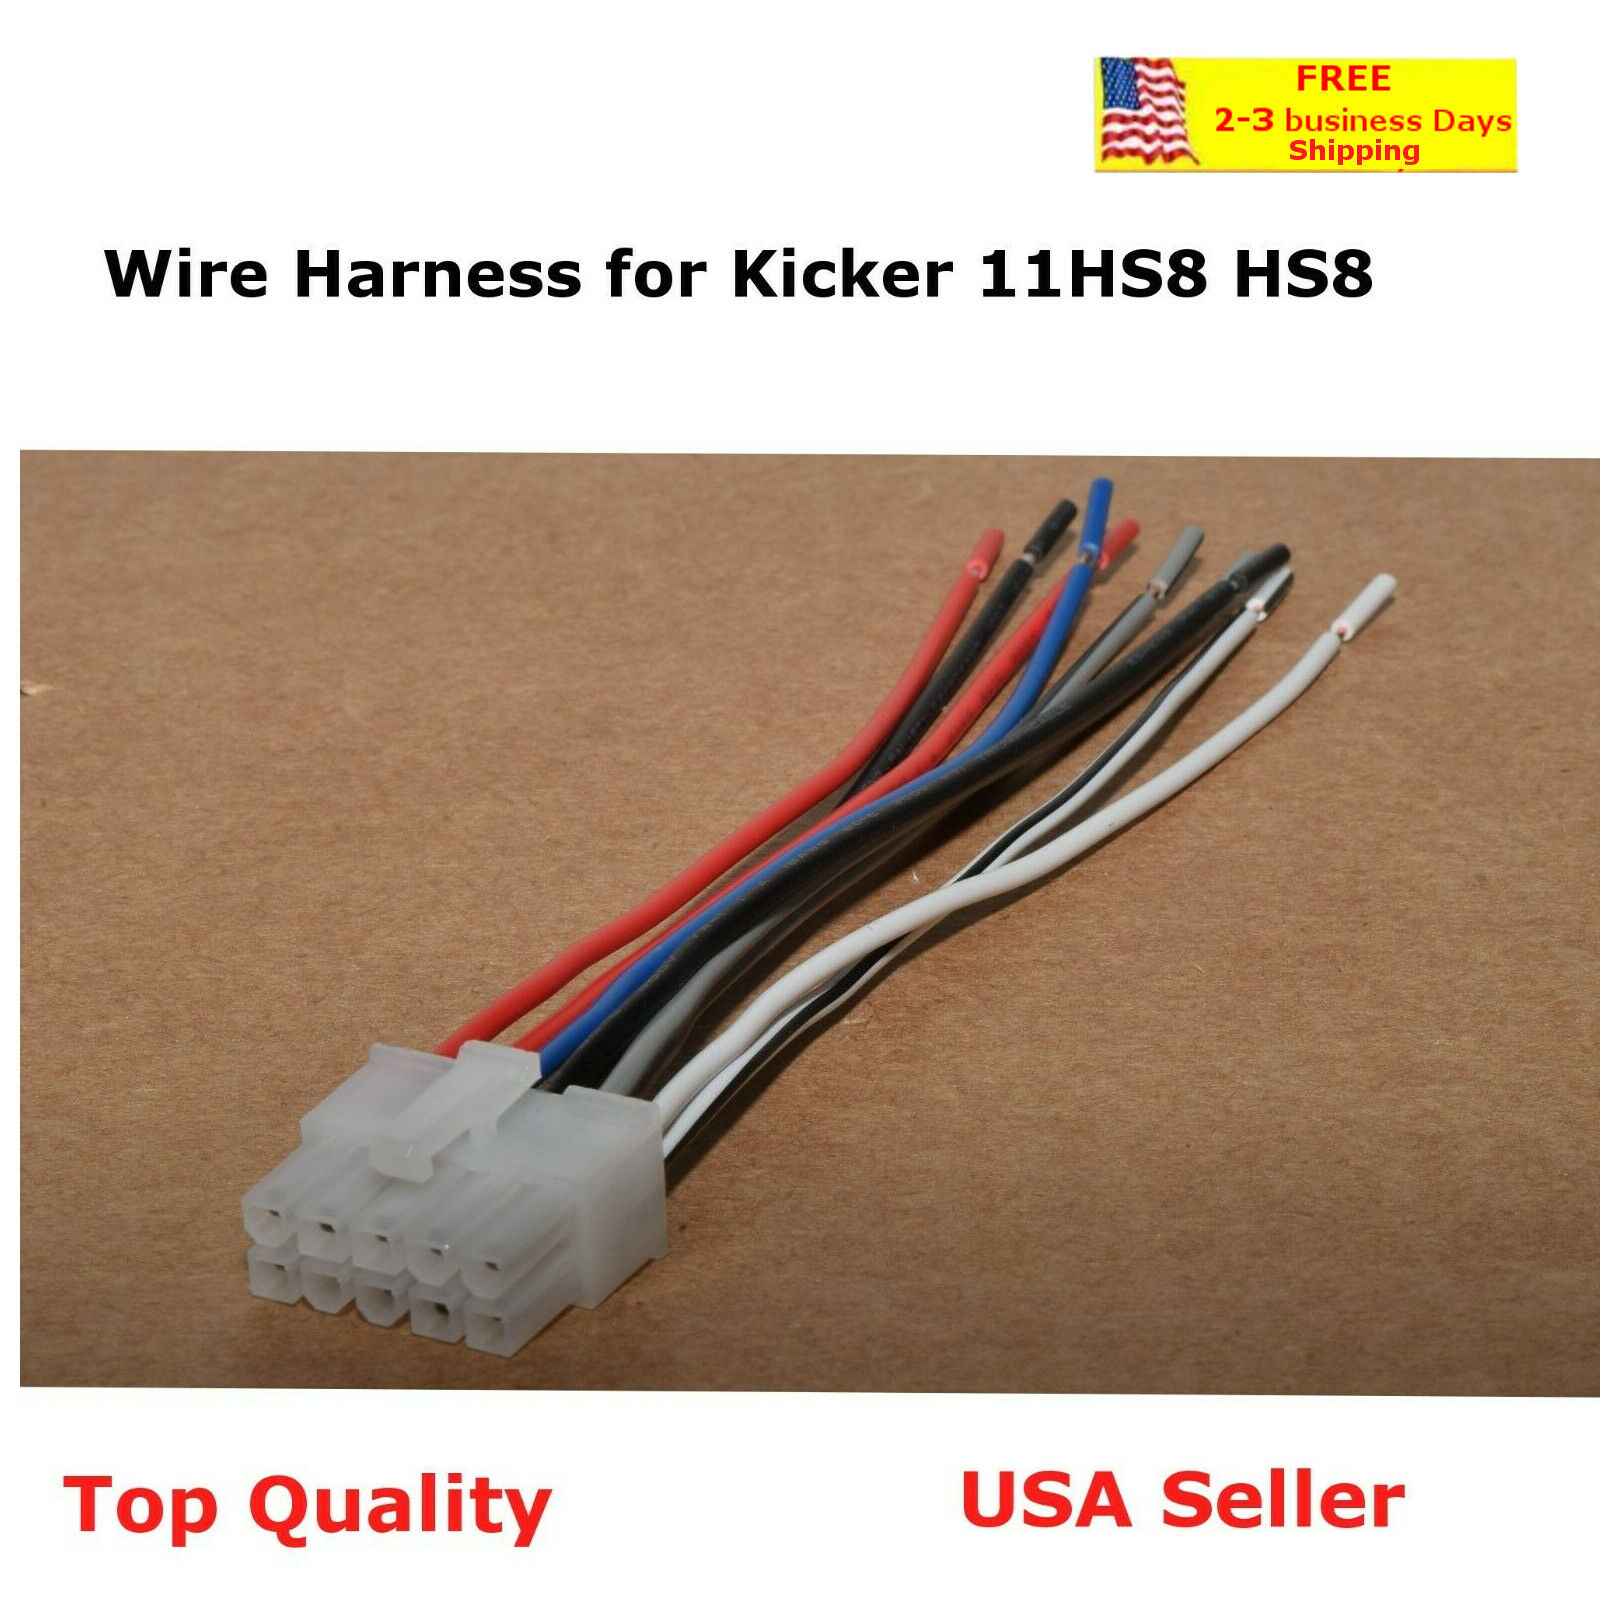 Wire Harness For Kicker Bass Station Powered Subwoofer Hideaway Model 11hs8 Hs8